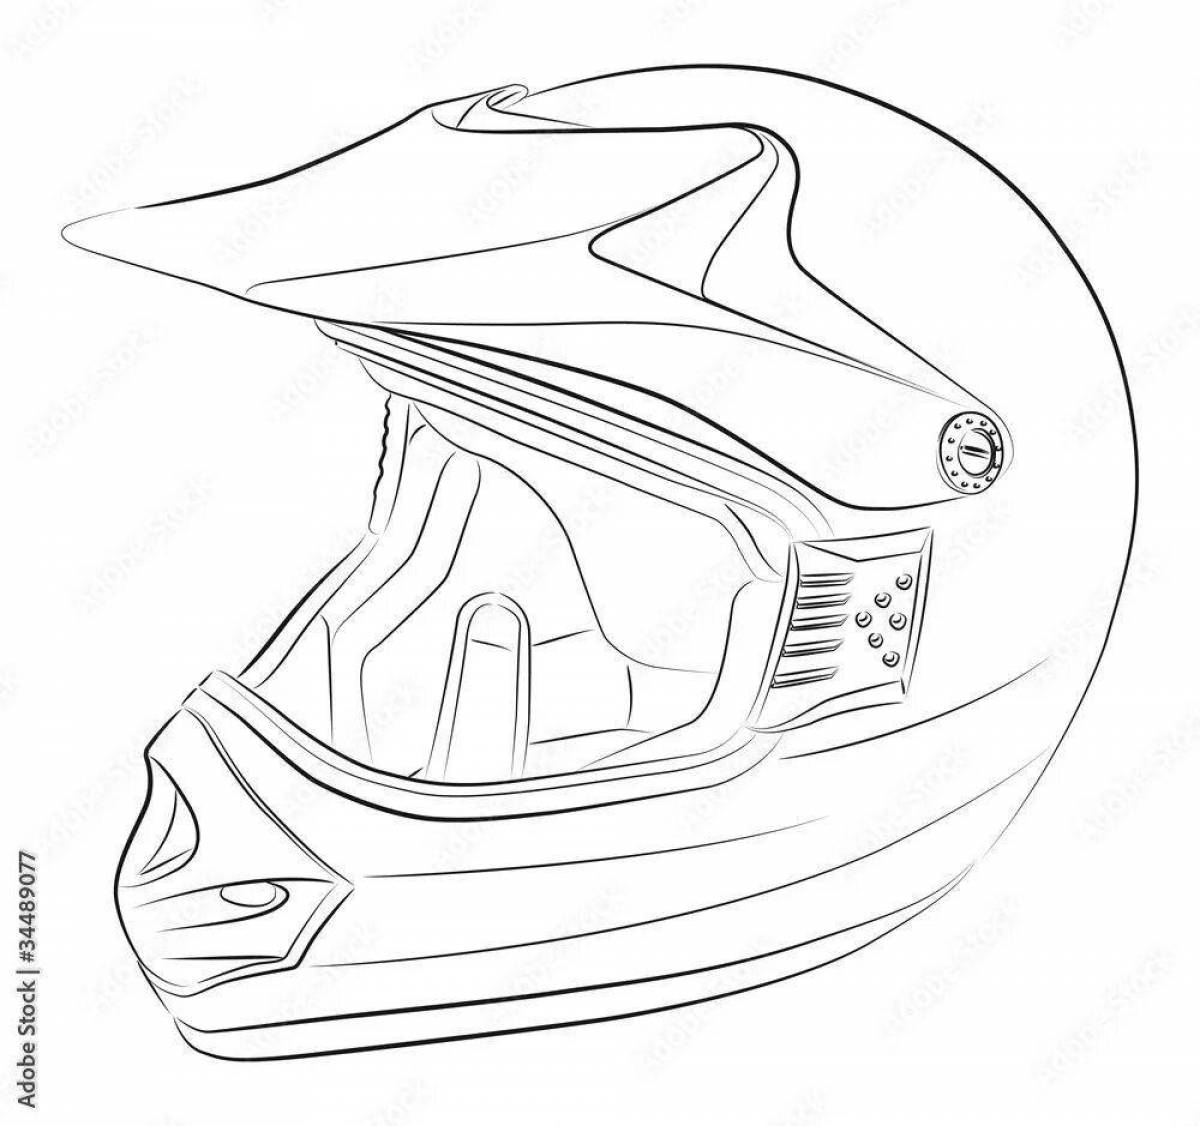 Coloring page of an irresistible motorcycle helmet